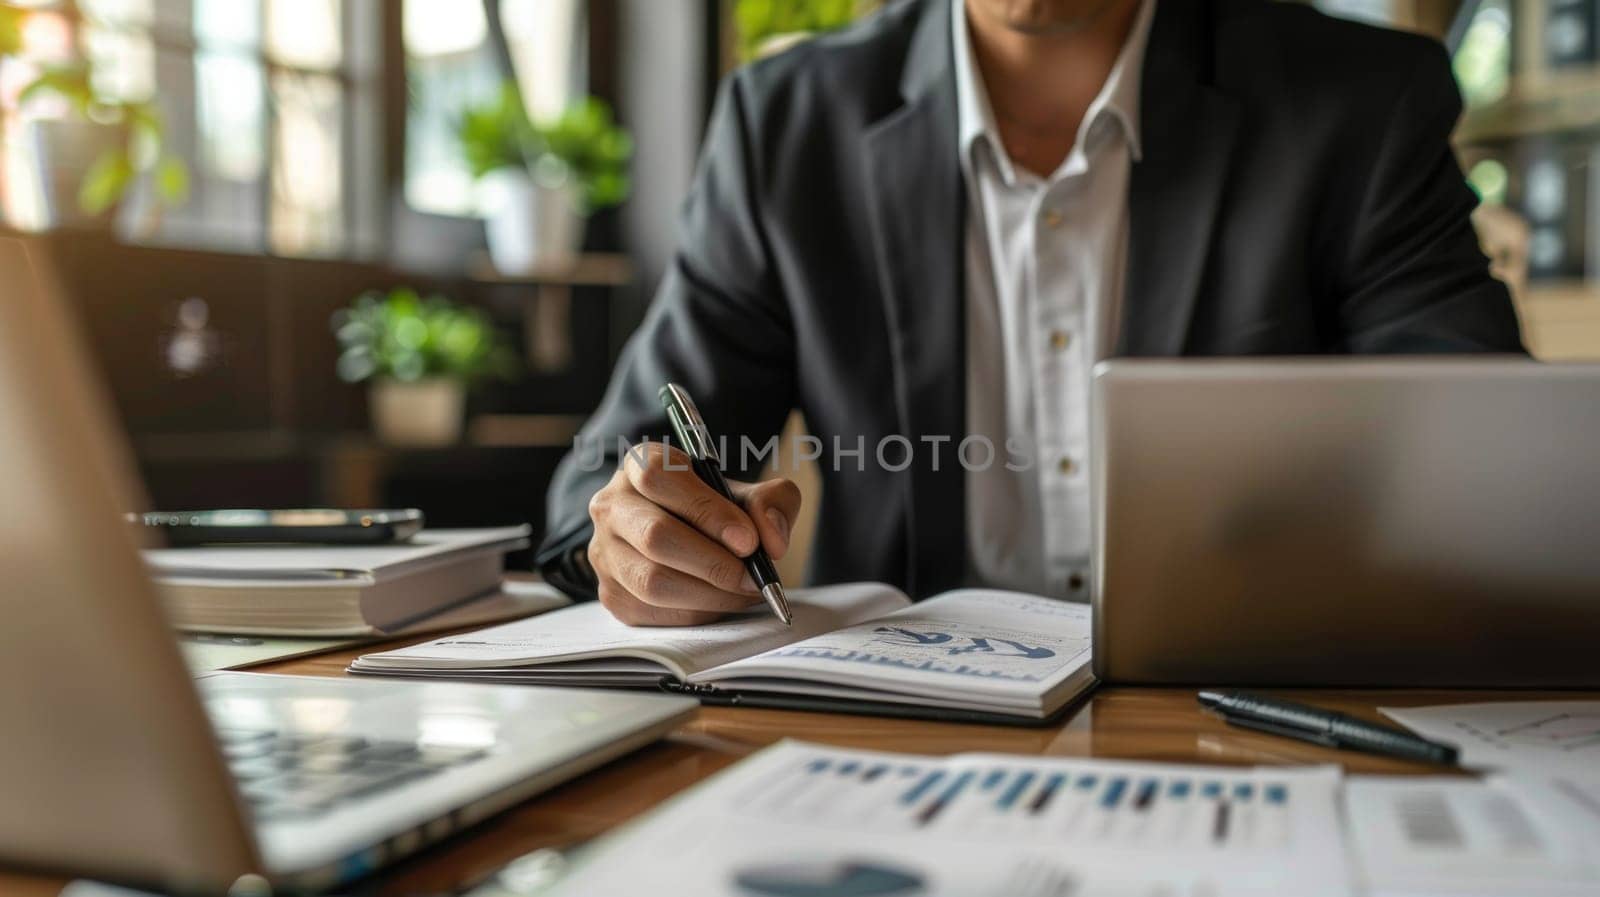 A man is writing on a piece of paper with a pen.